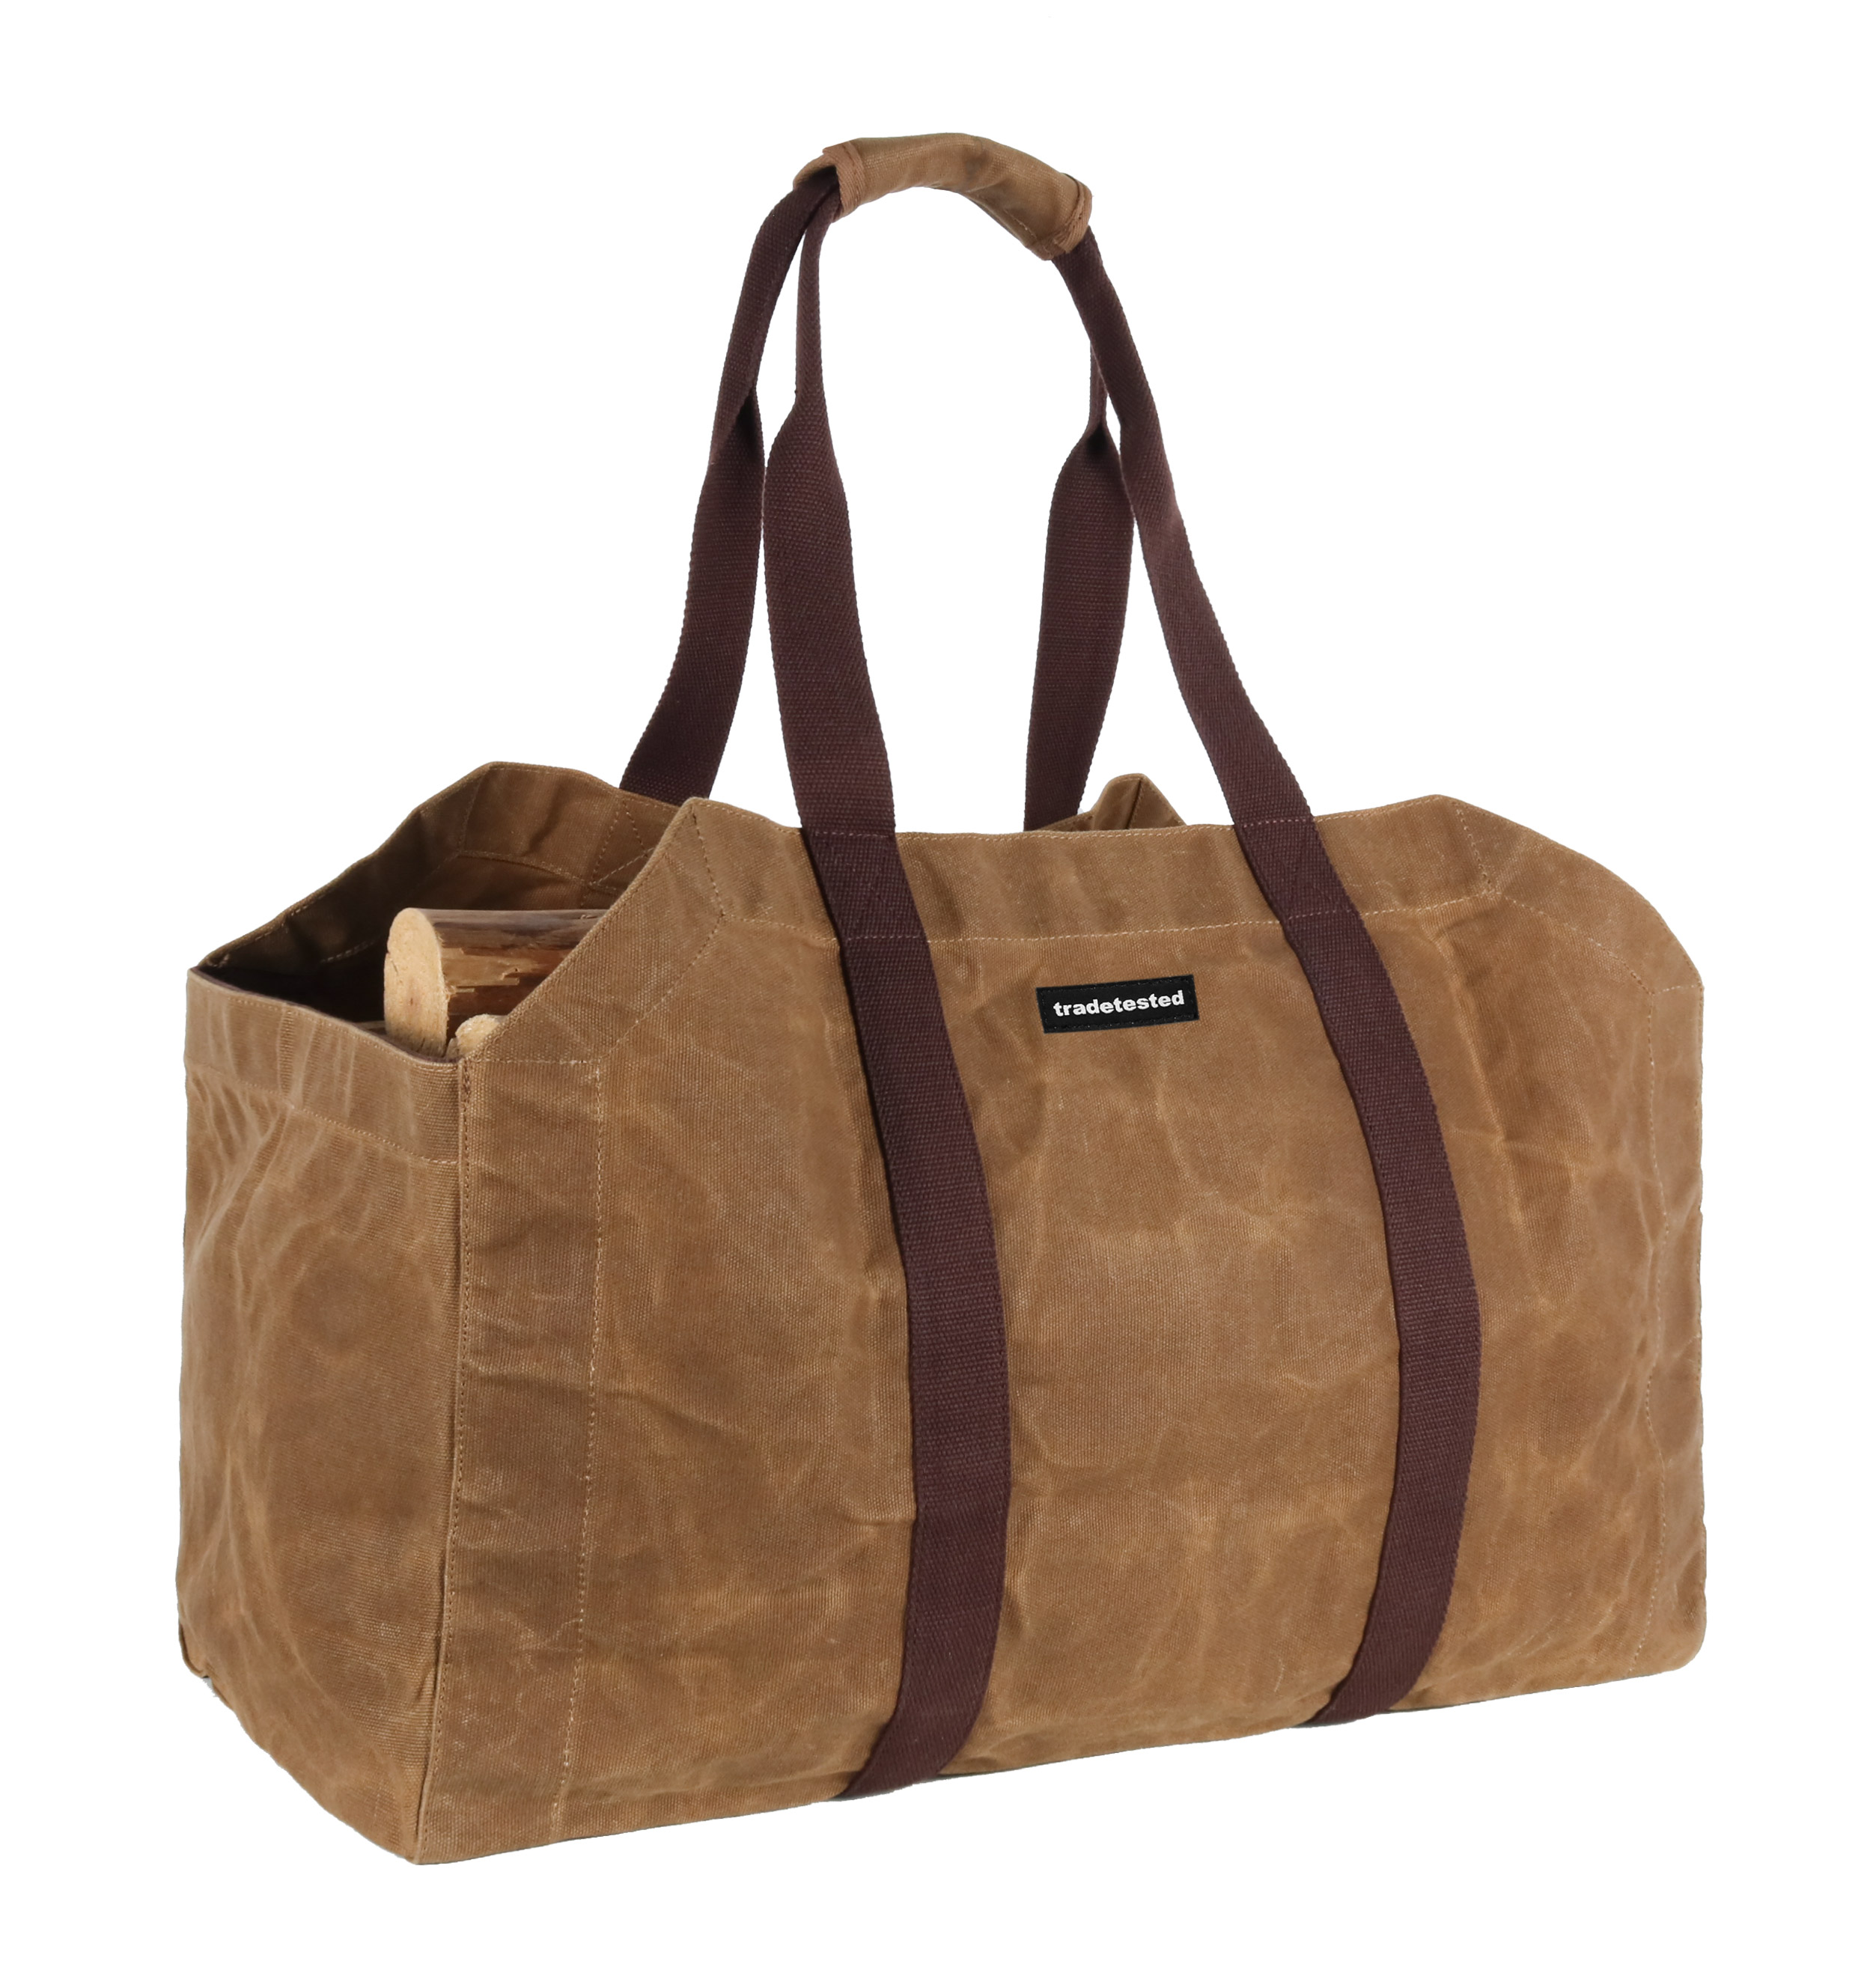 Firewood Bag Waxed Canvas - Accessories - Log Splitters - Outdoor